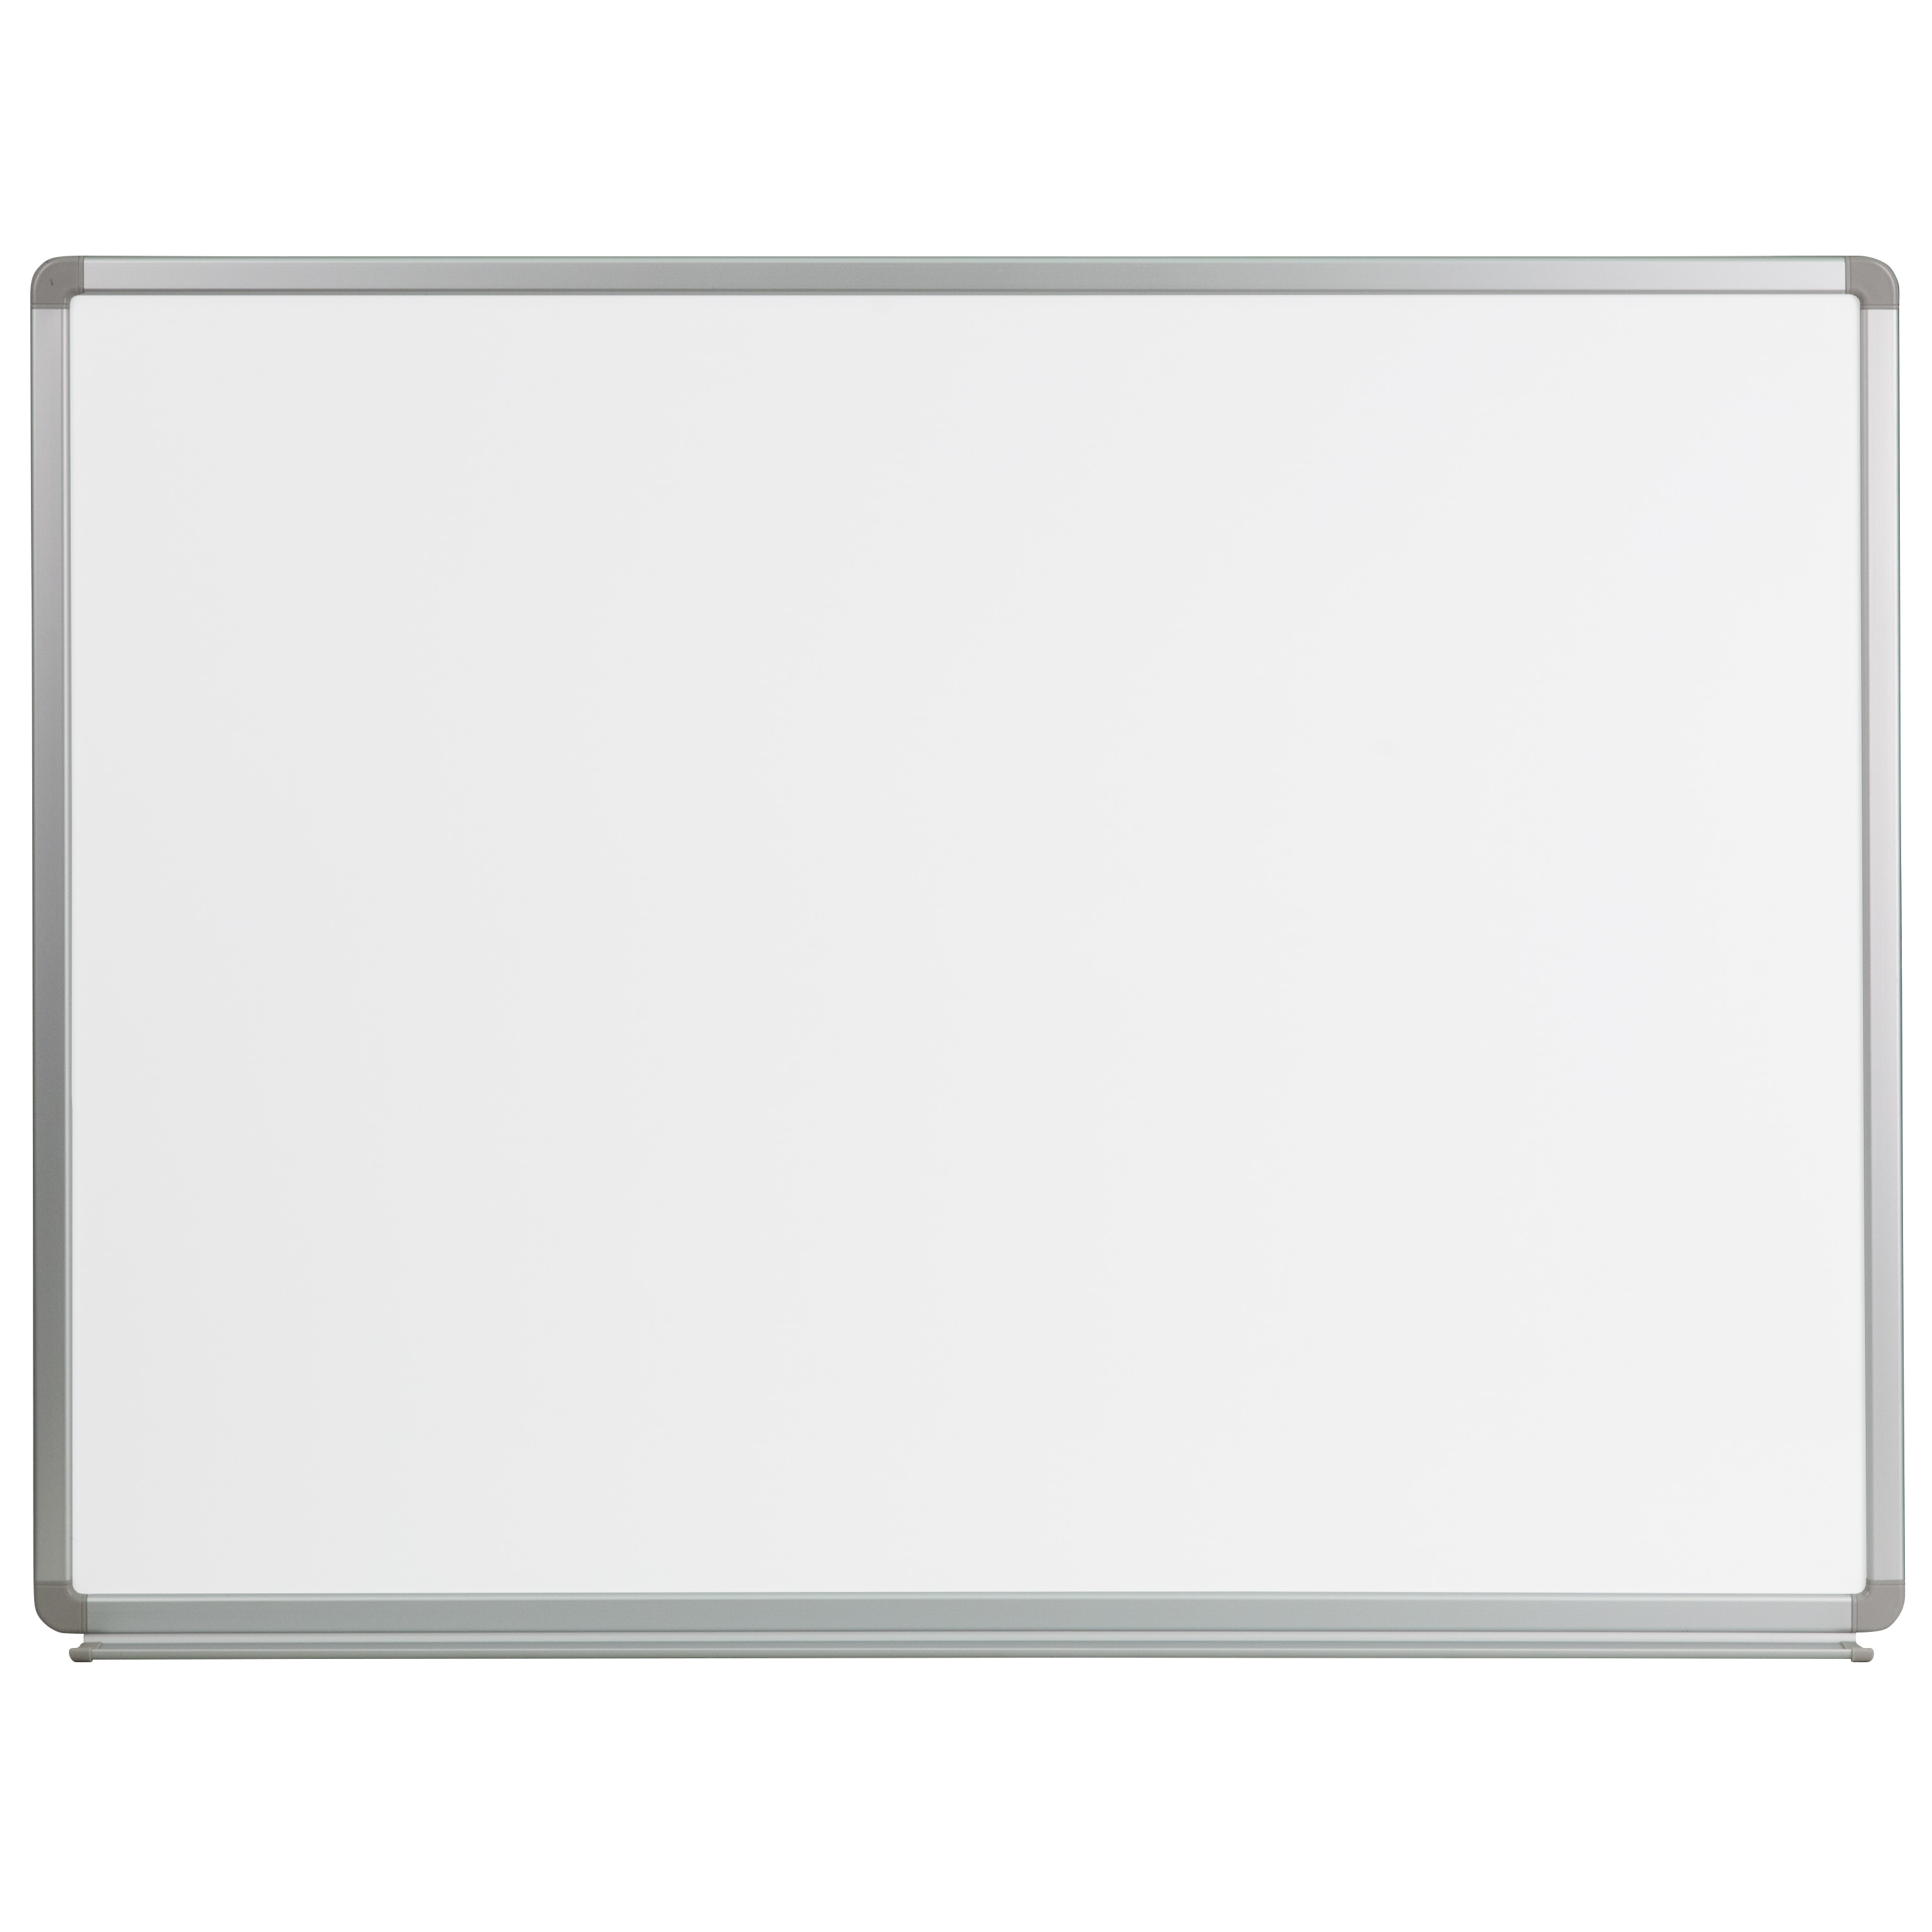 Whiteboard Wallpaper, White Board Stickers, Dry Erase Paper, Peel and Stick White Erase Boards for Wall/Table/Doors/Glass/Fridge, 8 x 4 ft/96 x 48